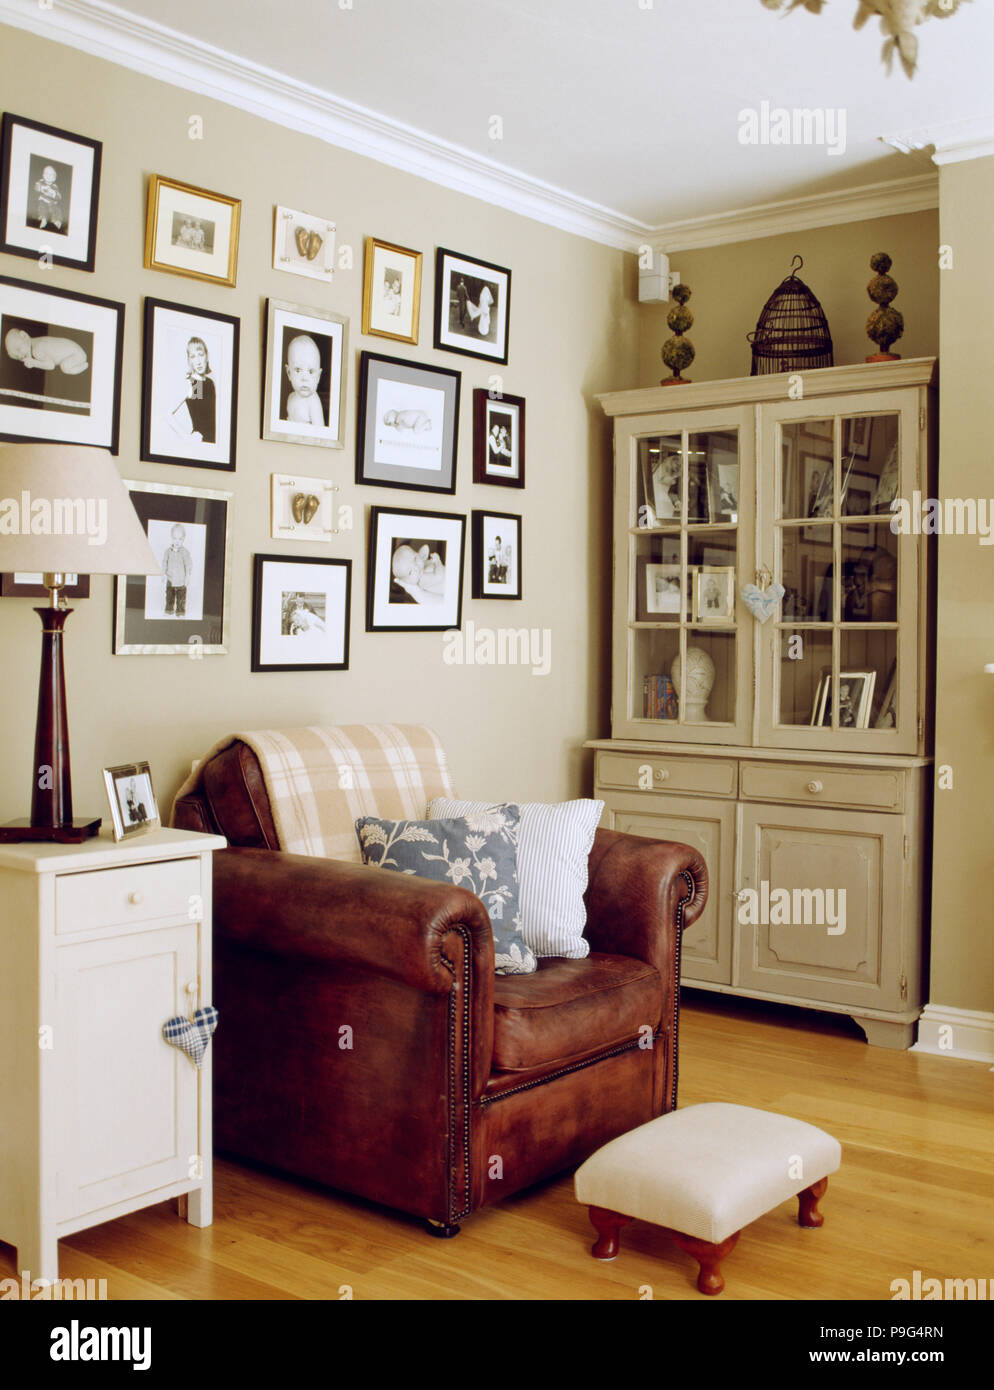 Framed Black White Photographs On Wall Above Brown Leather